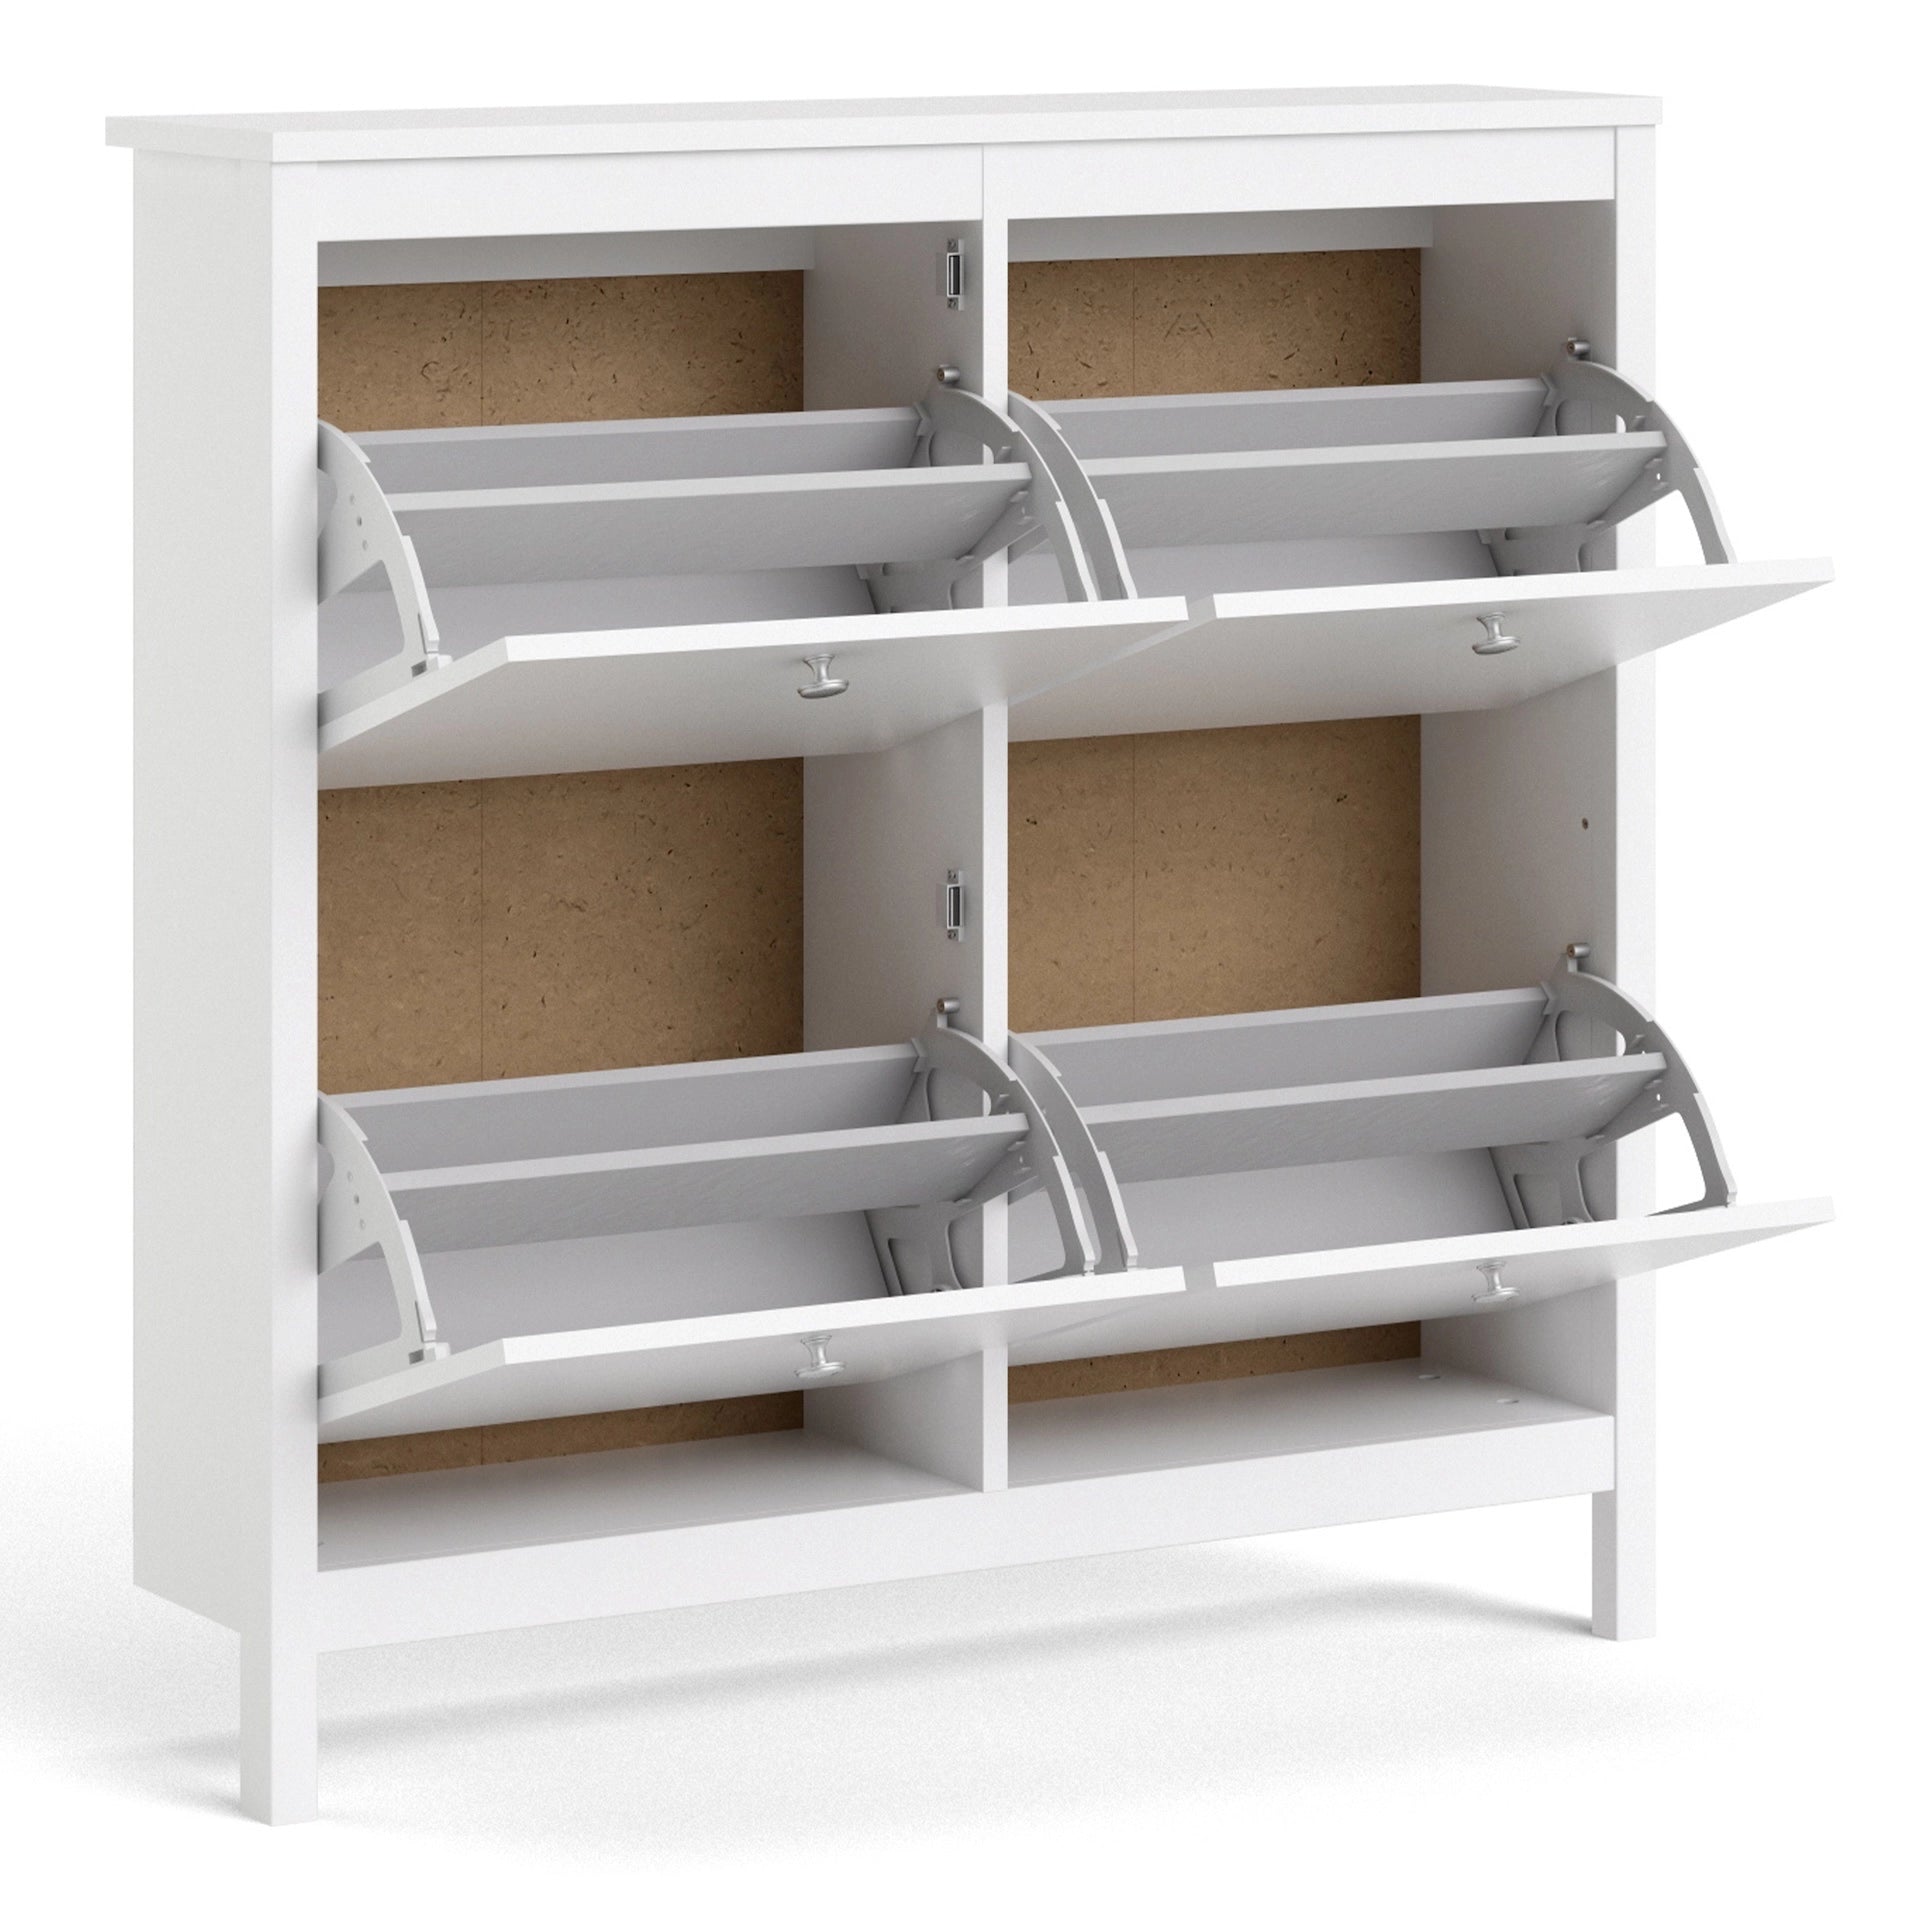 Furniture To Go Madrid Shoe Cabinet 4 Compartments in White